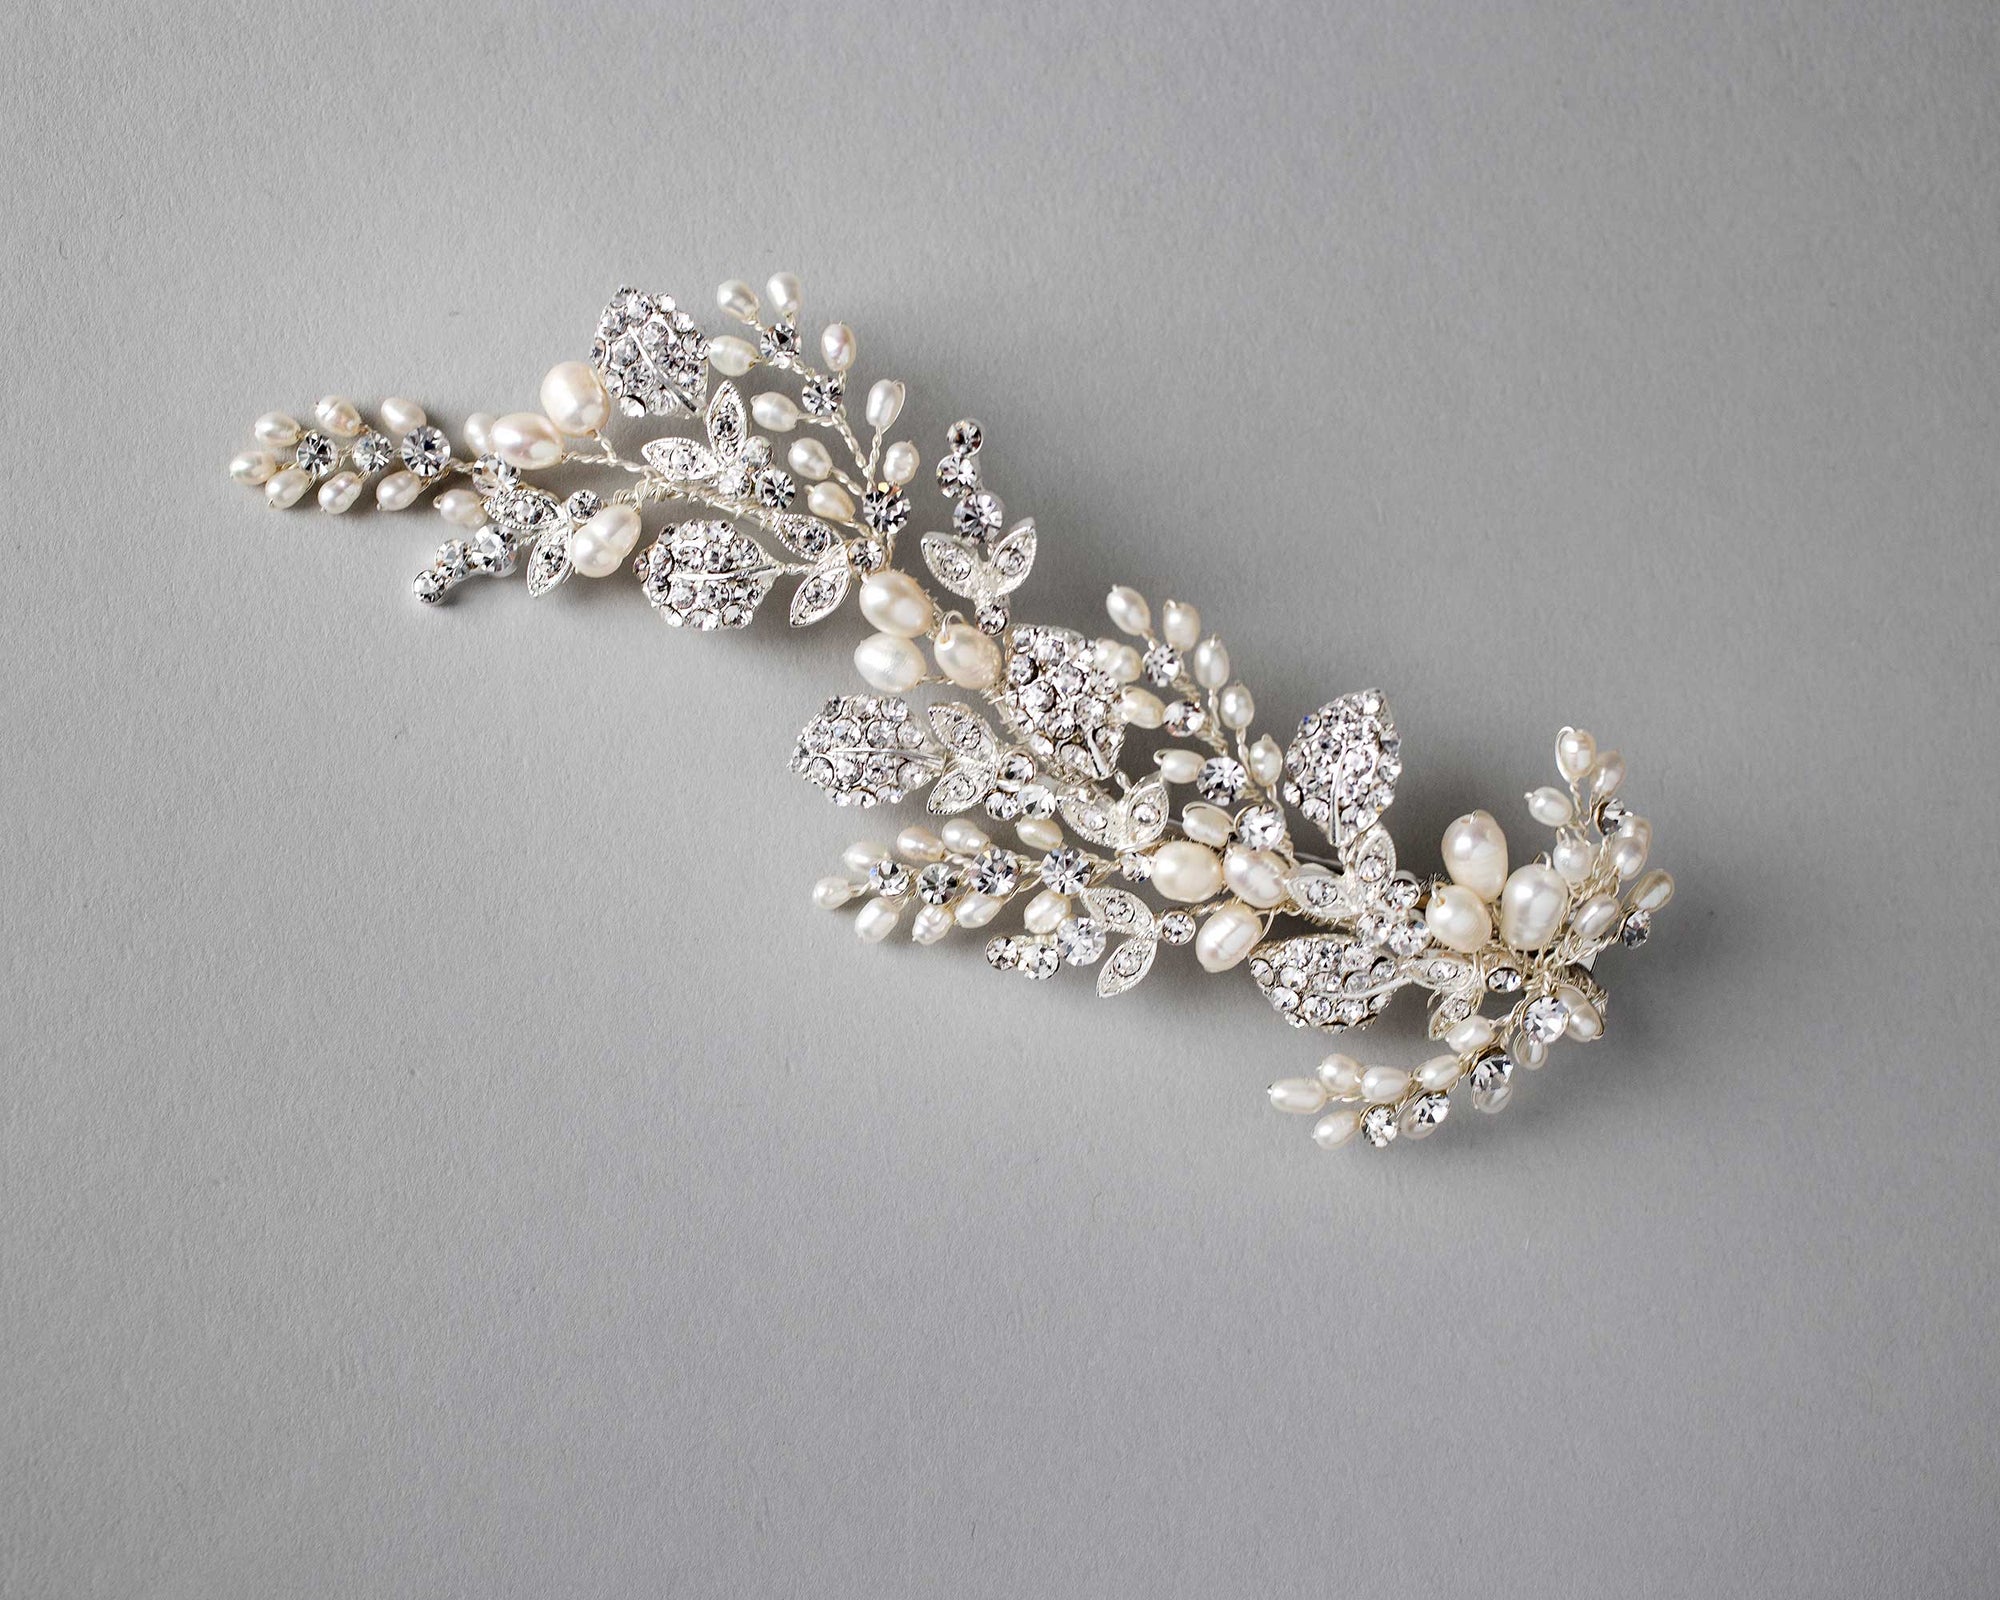 Ivory Cultured Pearls and Crystals Bridal Hair Clip Cassandra Lynne